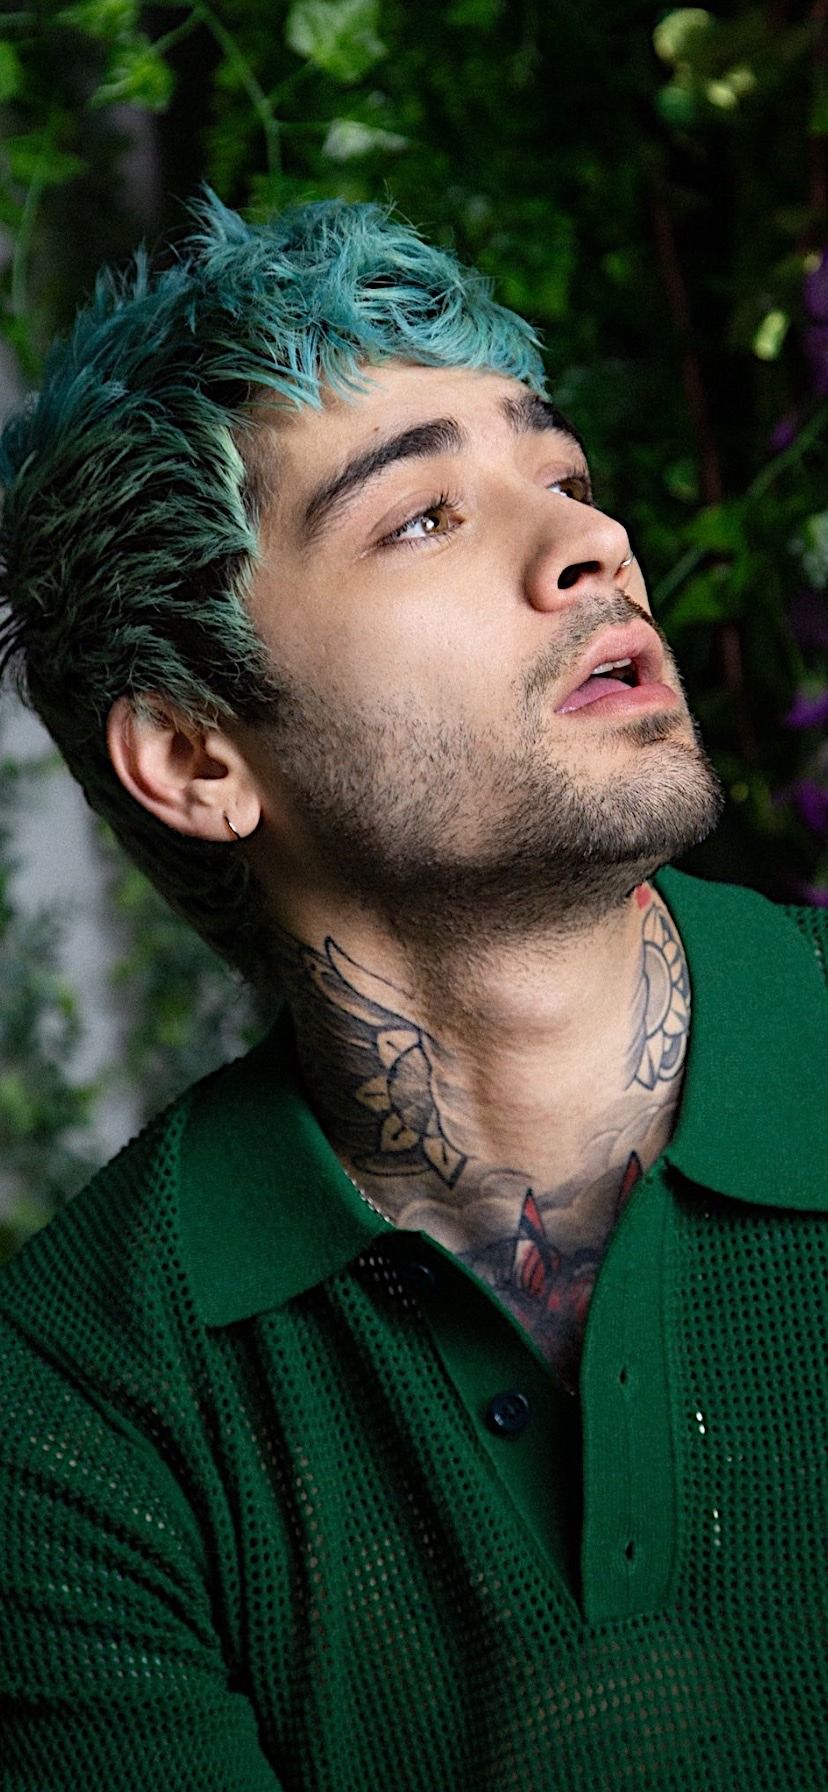 Zayn Malik wallpaper for iPhone with high-resolution 1080x1920 pixel. You can use this wallpaper for your iPhone 5, 6, 7, 8, X, XS, XR backgrounds, Mobile Screensaver, or iPad Lock Screen - One Direction